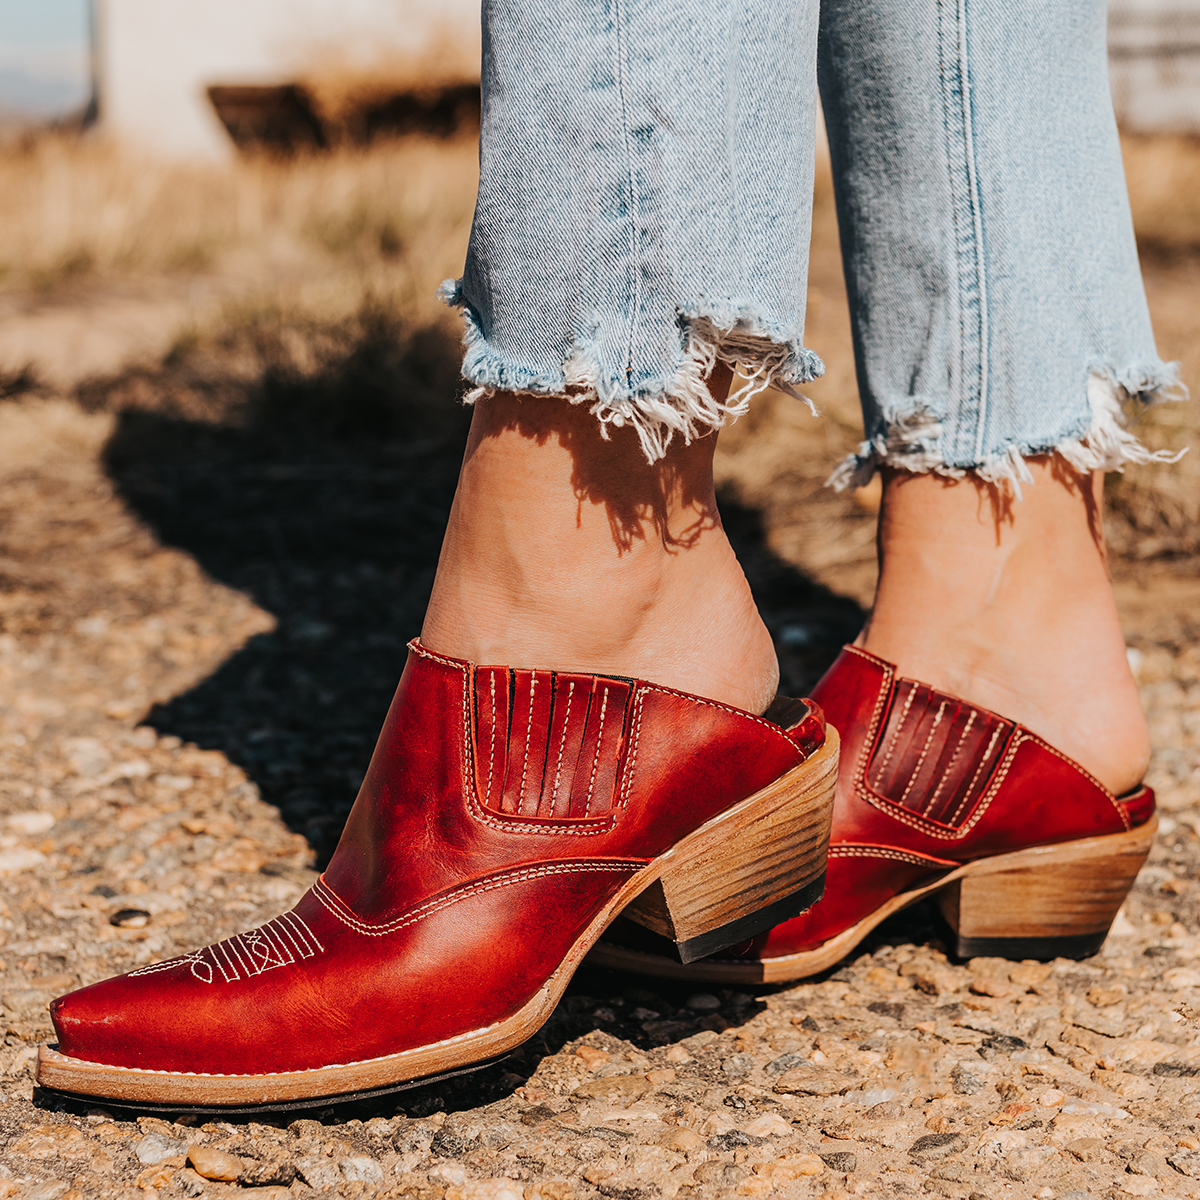 FREEBIRD women's Wentworth red western mule featuring elastic gore, stitch detailing, open back, and snip toe